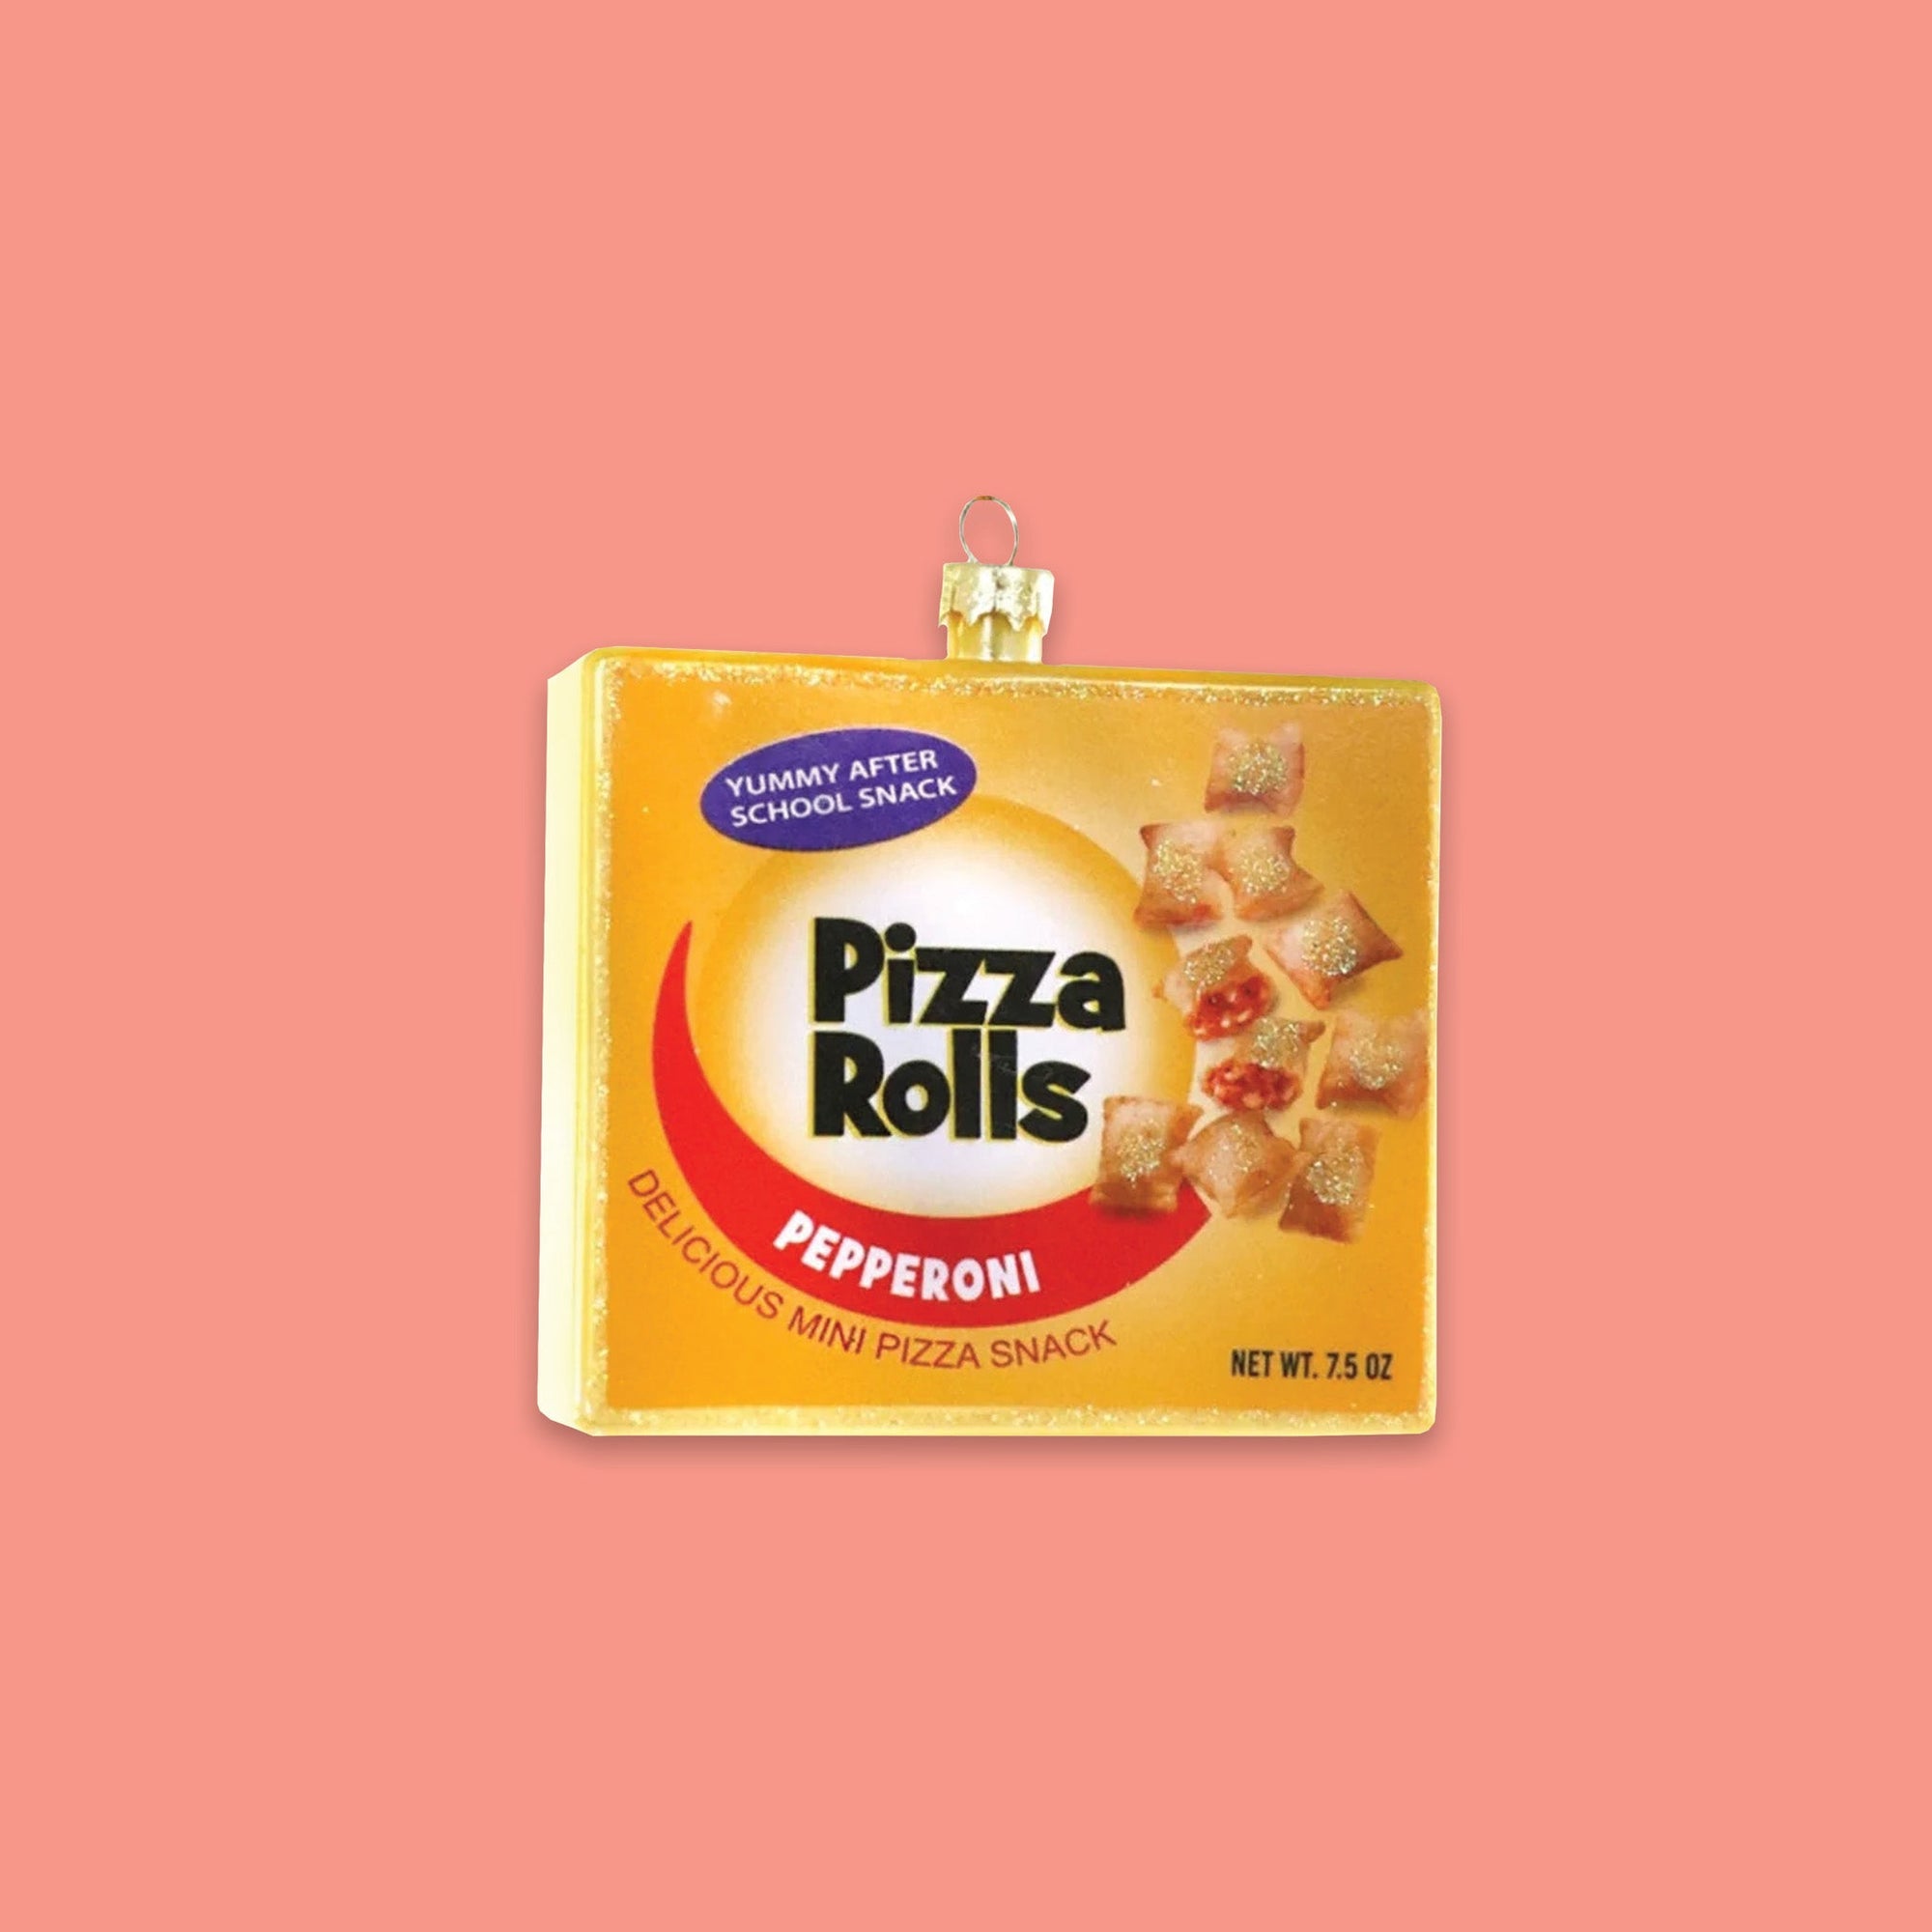 On a coral pink background sits a box ornament. This 'Pizza Rolls' glass box ornament is yellow with red and has pizza rolls on the front. It says "YUMMY AFTER SCHOOL SNACK" and "PEPPERONI DELICIOUS MINI PIZZA SNACK."